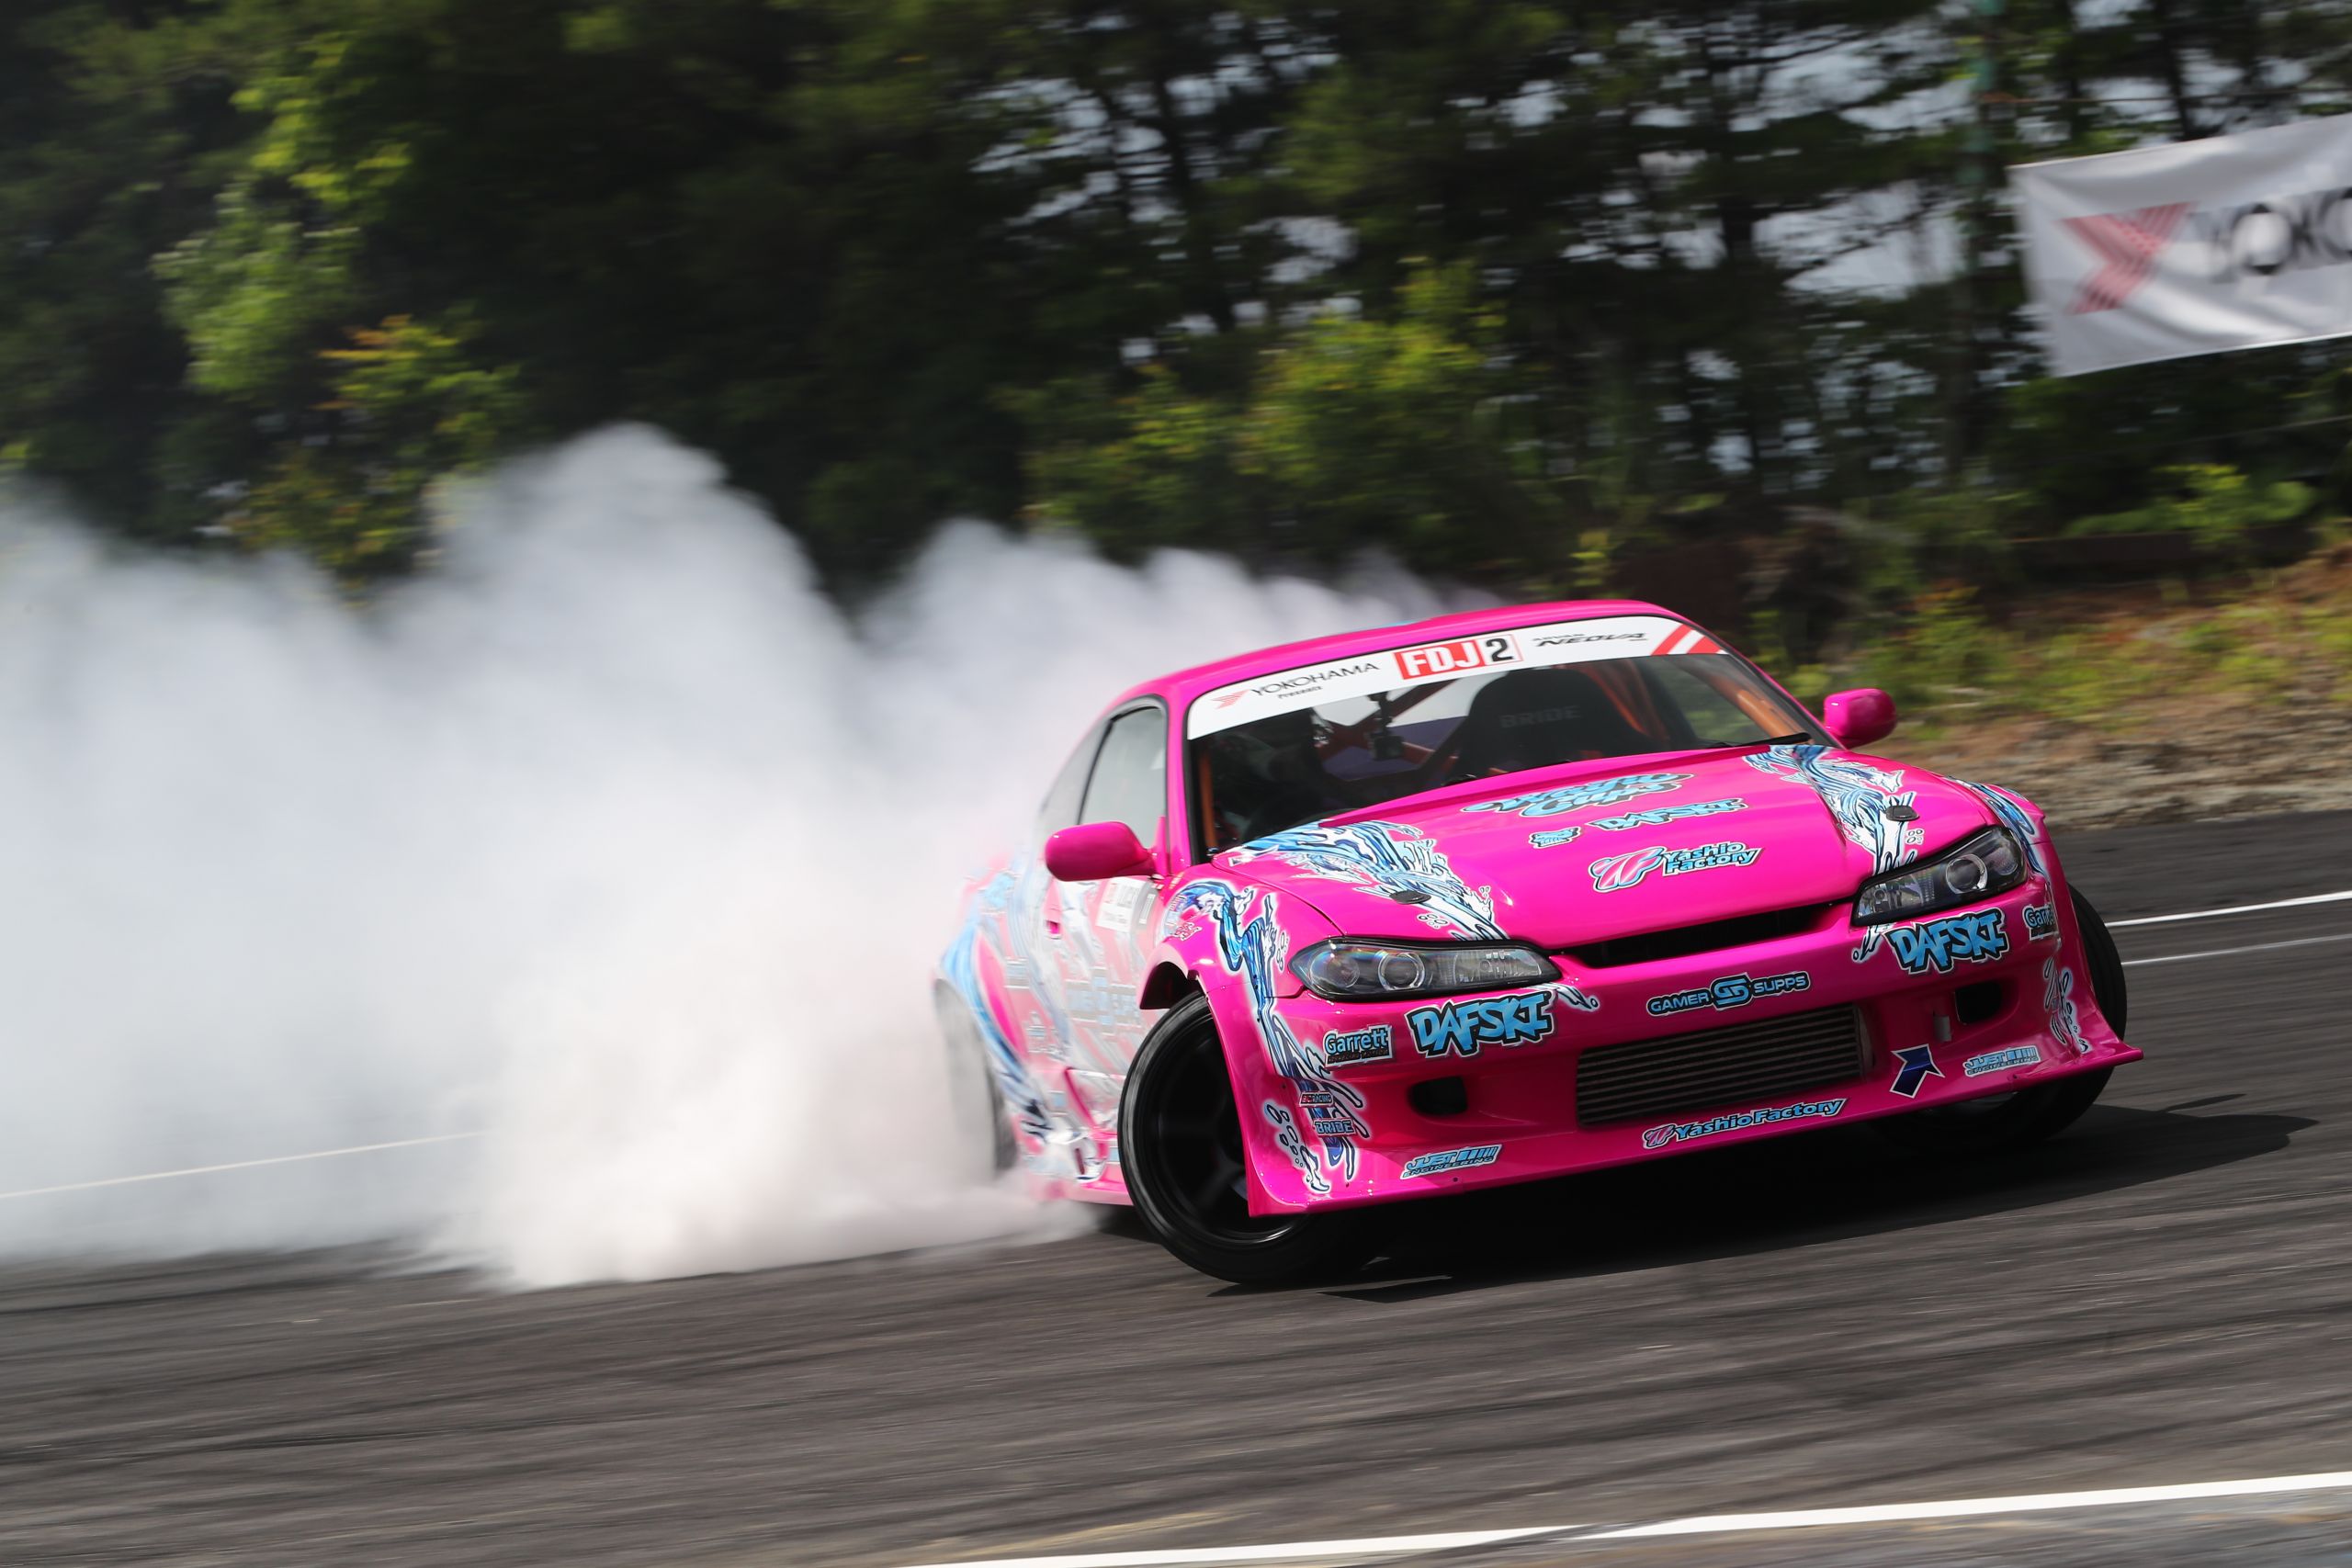 For the Love of Cars: Auto Racing in Japan